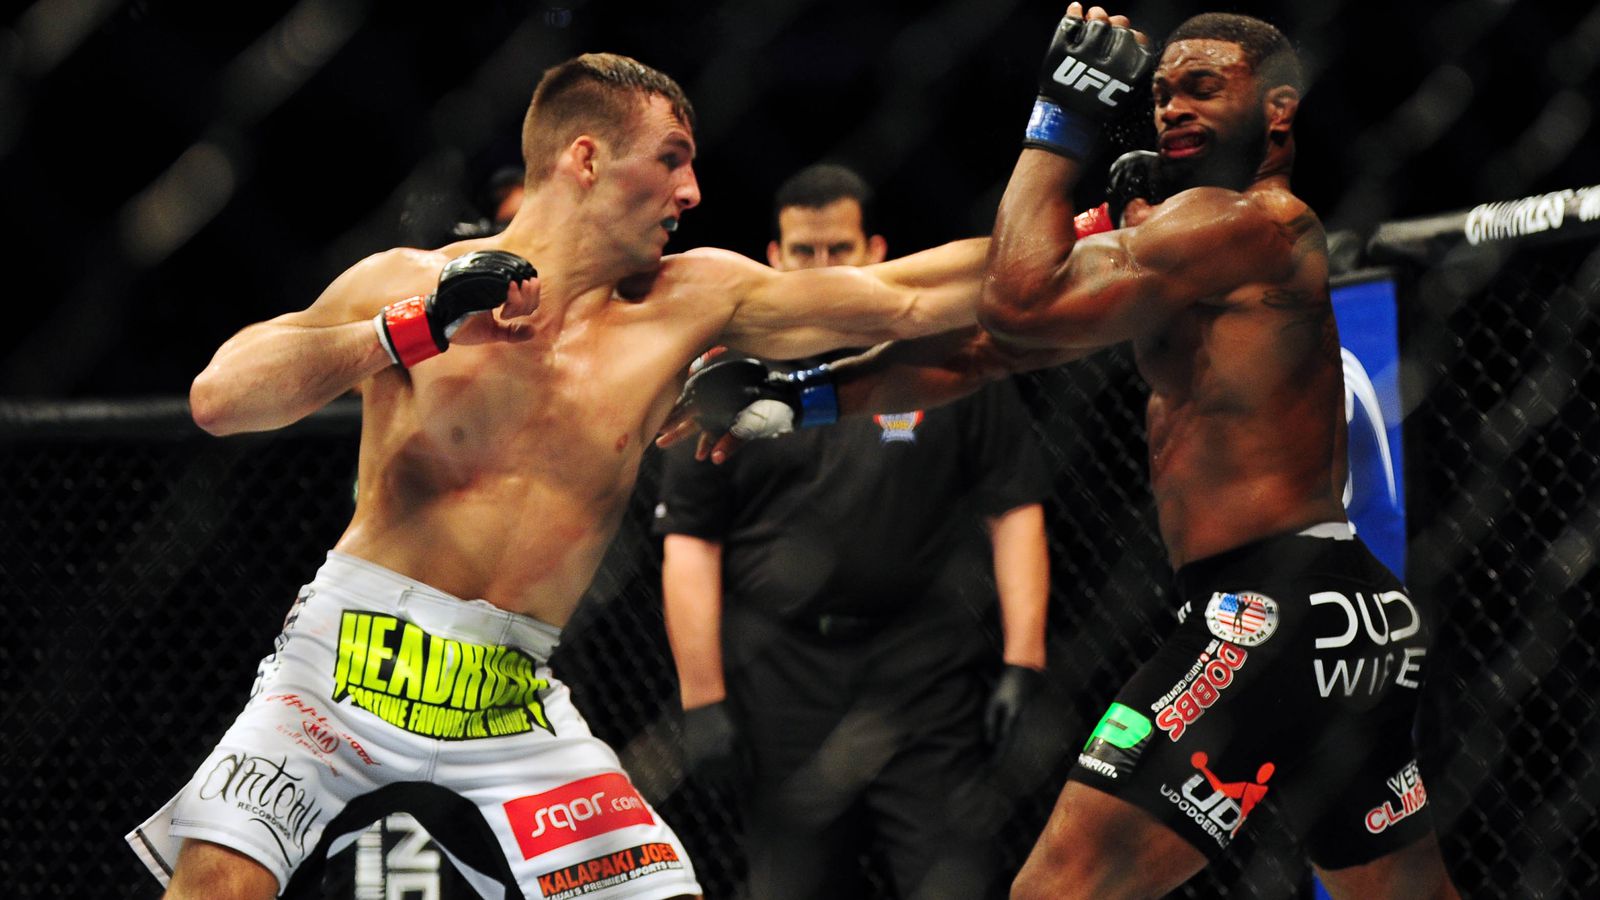 Rory MacDonald vs. Tyron Woodley full fight video highlights from UFC 174 - MMAmania.com